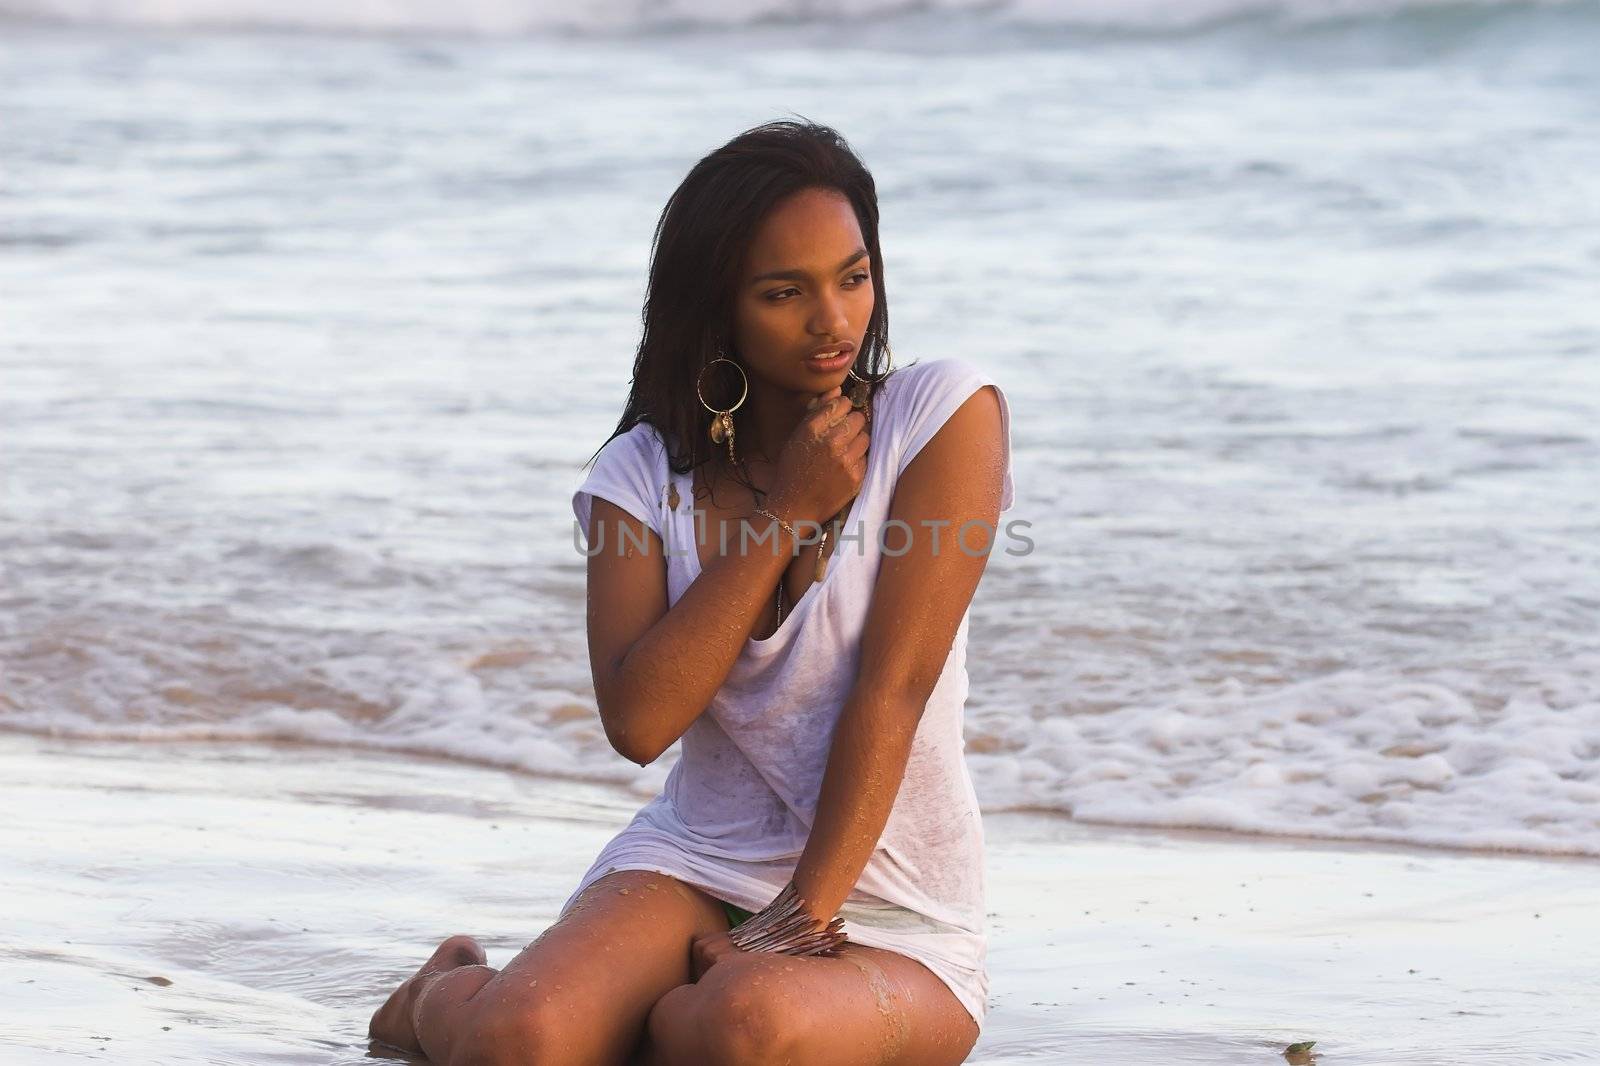 Caribbean model in wet t-shirt at the beach